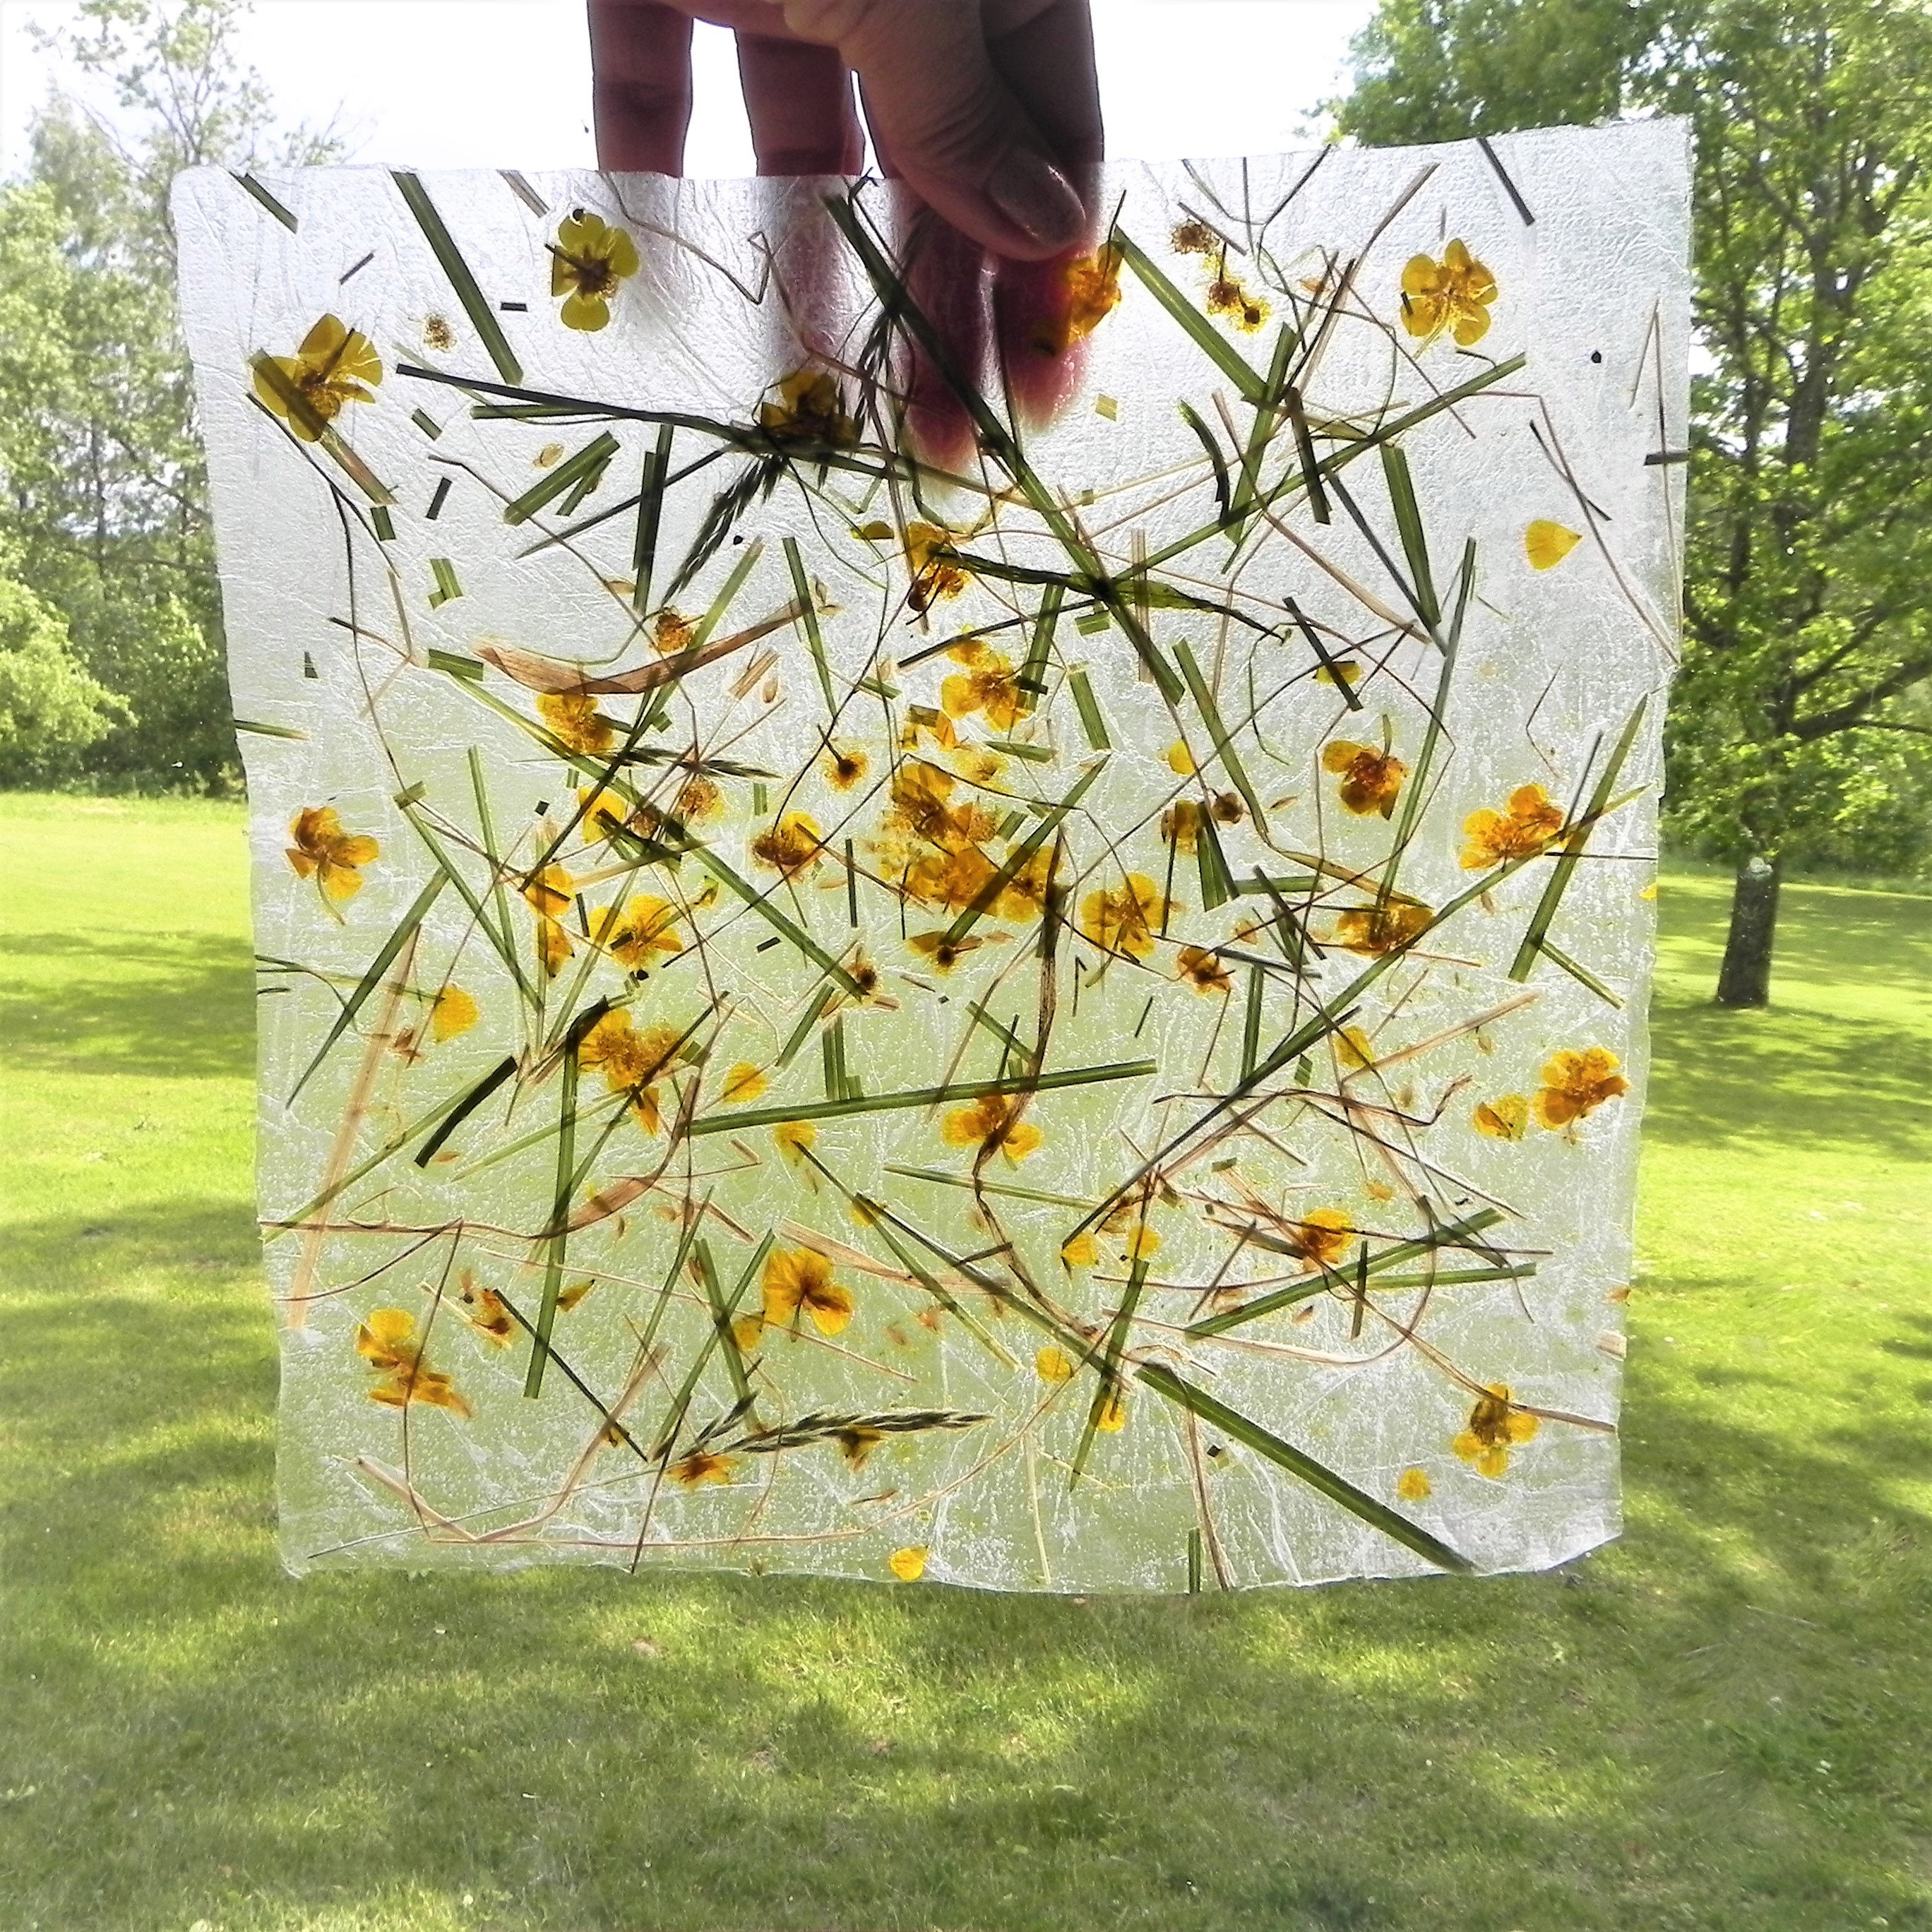 Handmade Paper Wildflowers - Finding Time To Create